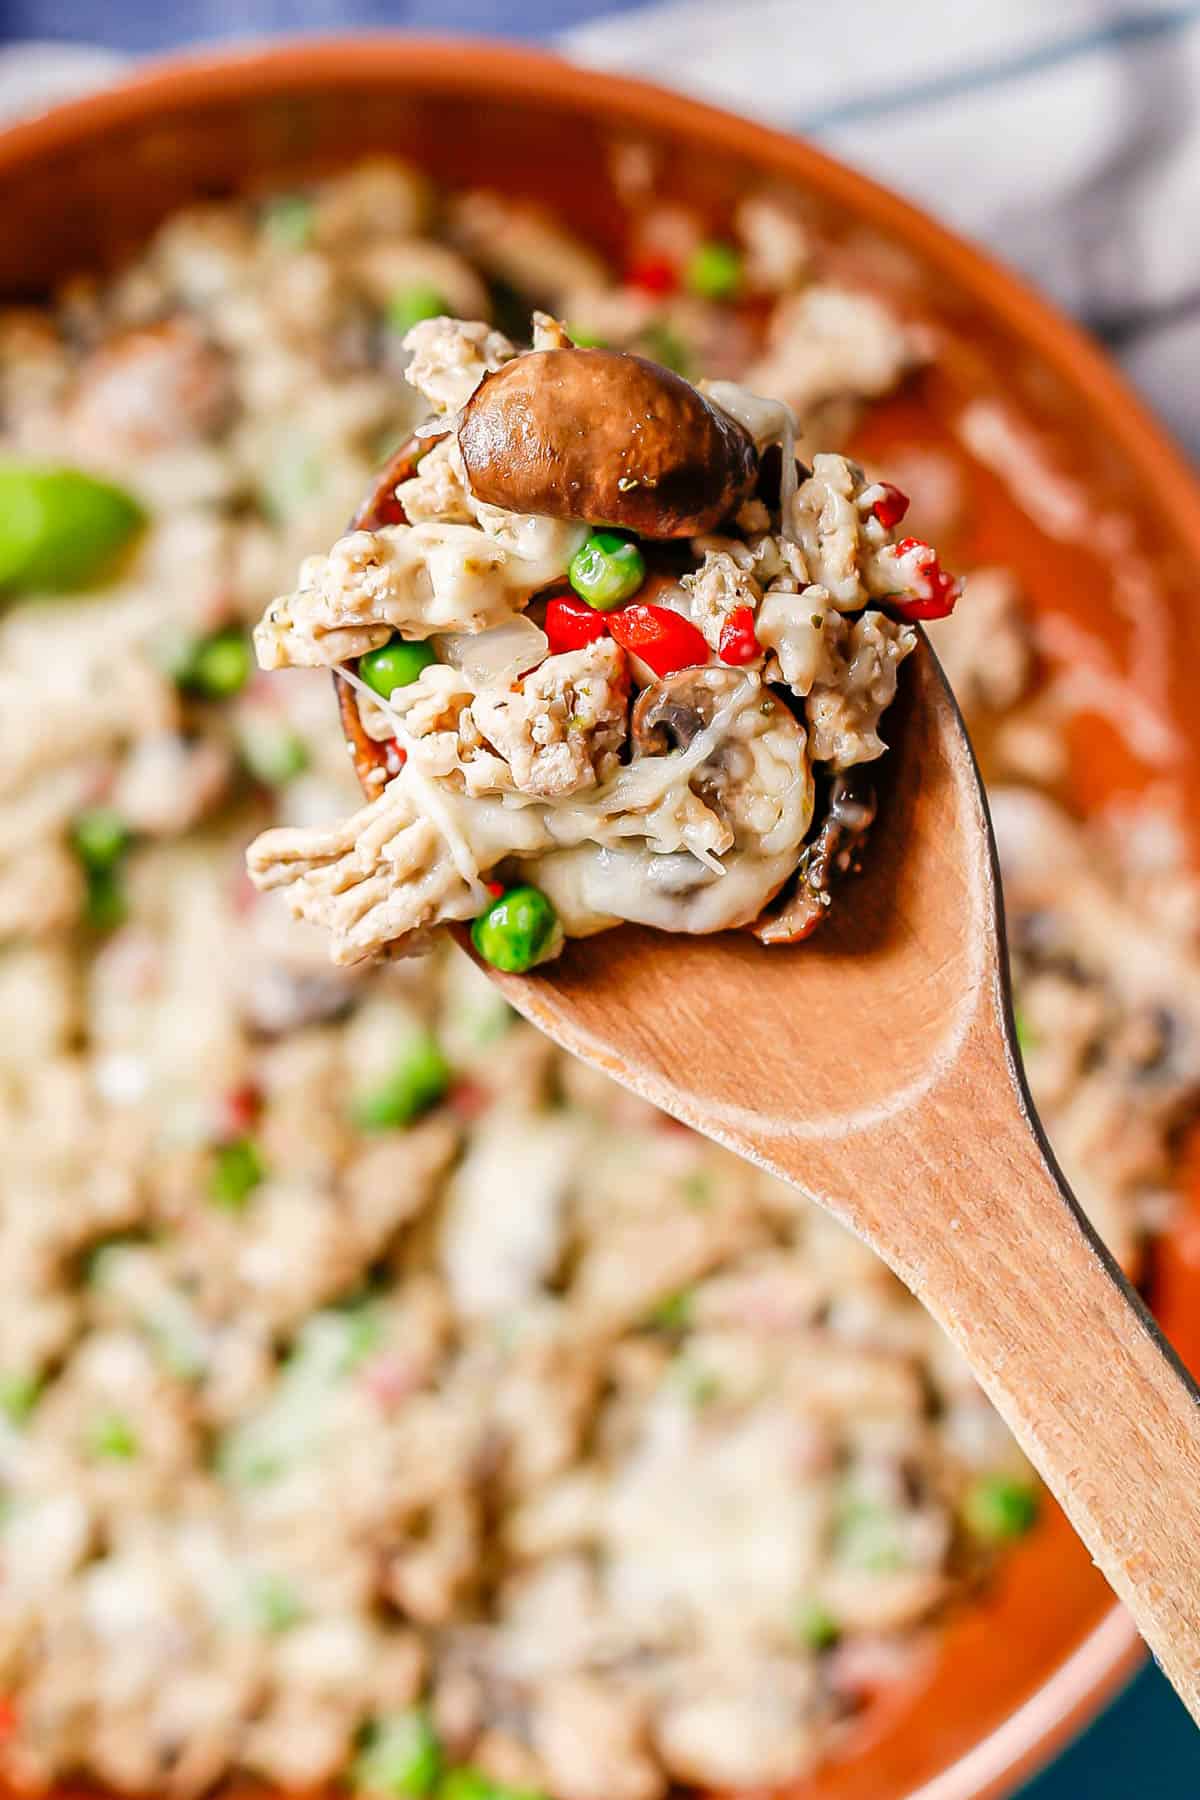 A wooden spoon lifting up a scoop of a ground chicken mixture with mushrooms, peas, pimientos and cheese.